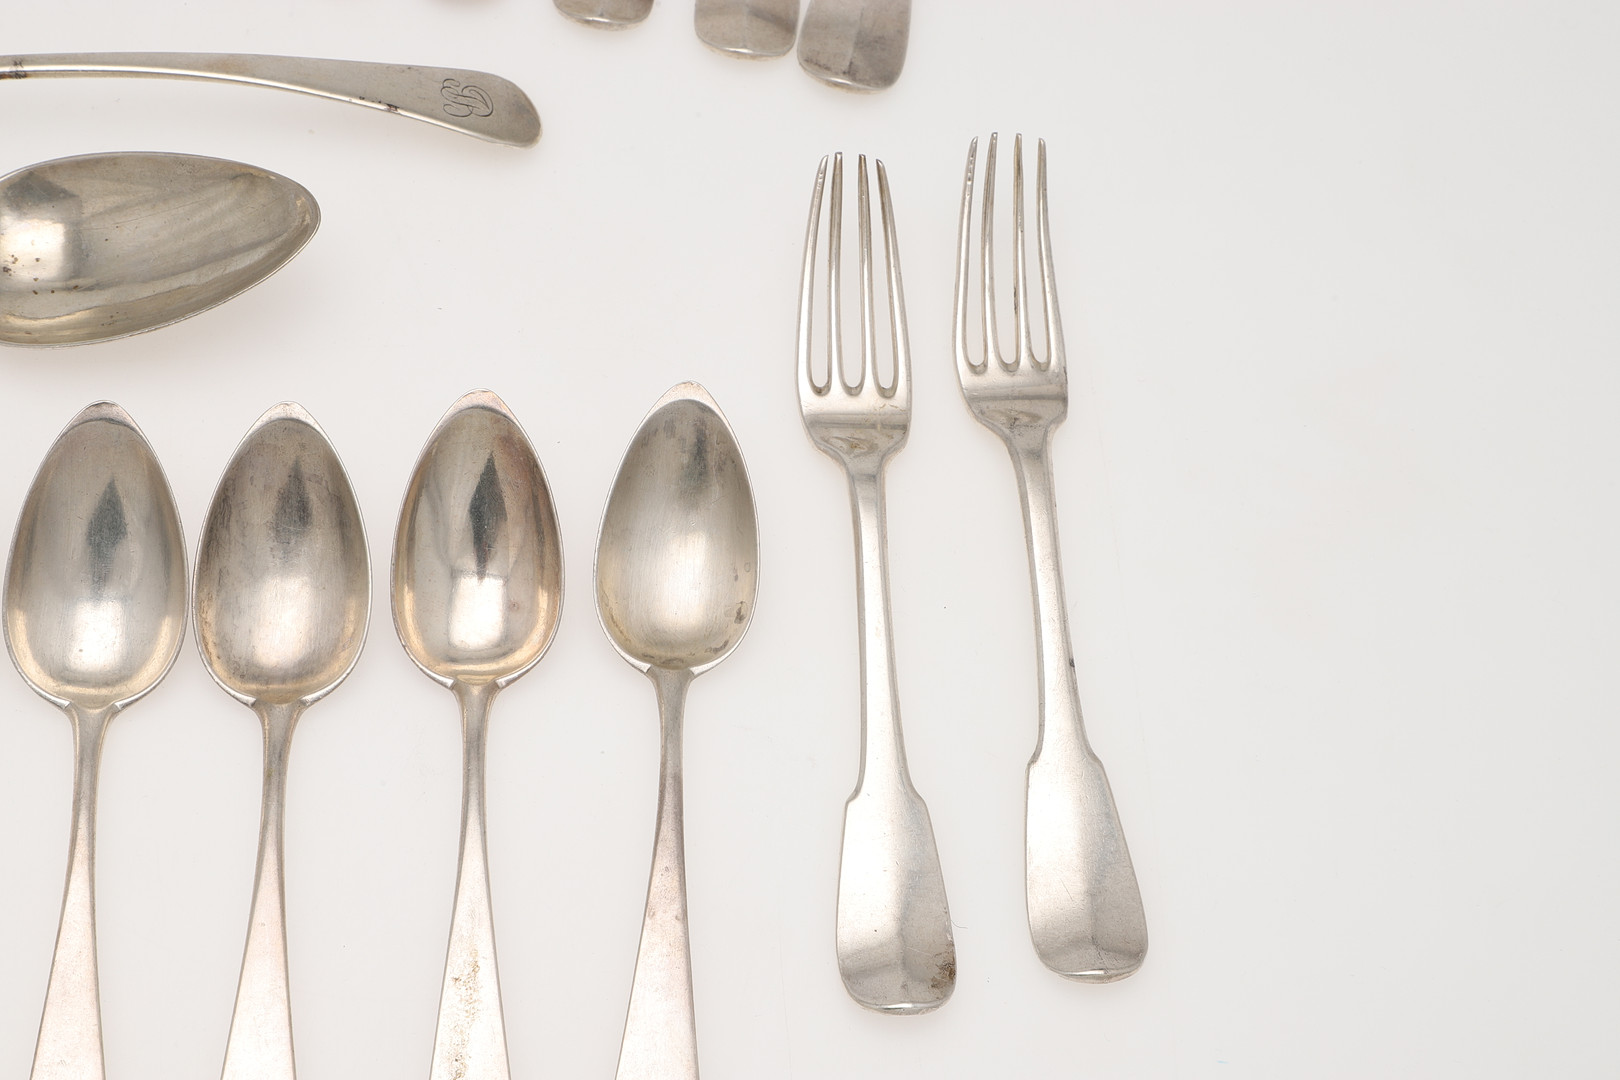 LATE 18TH/ EARLY 19TH CENTURY ITALIAN SILVER FLATWARE. - Image 8 of 15